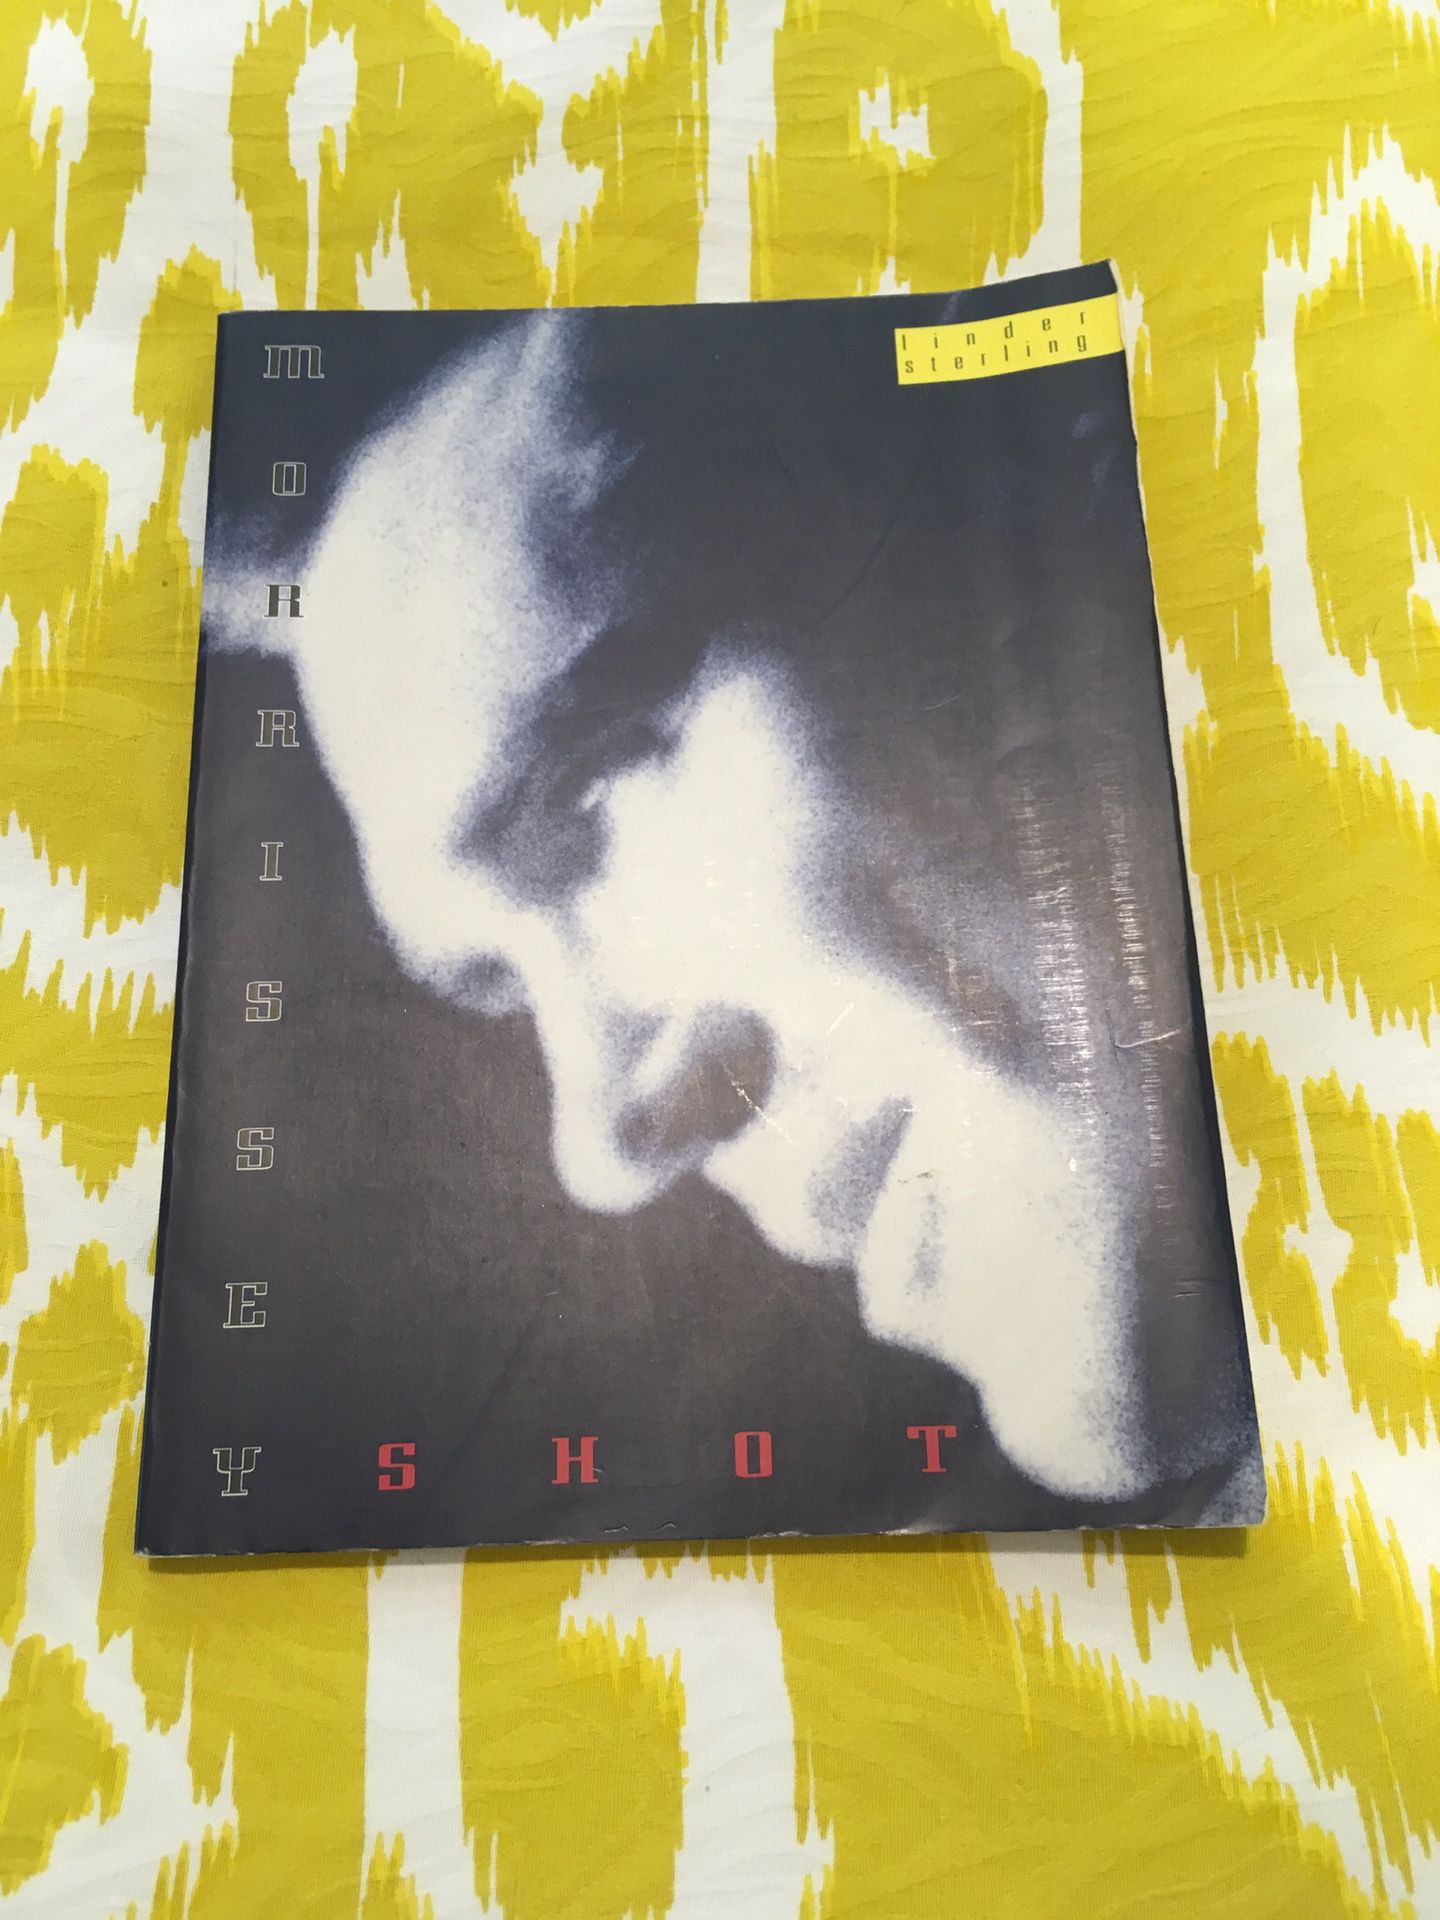 Morrissey-SHOT photo book by Linder Sterling, 1st edition